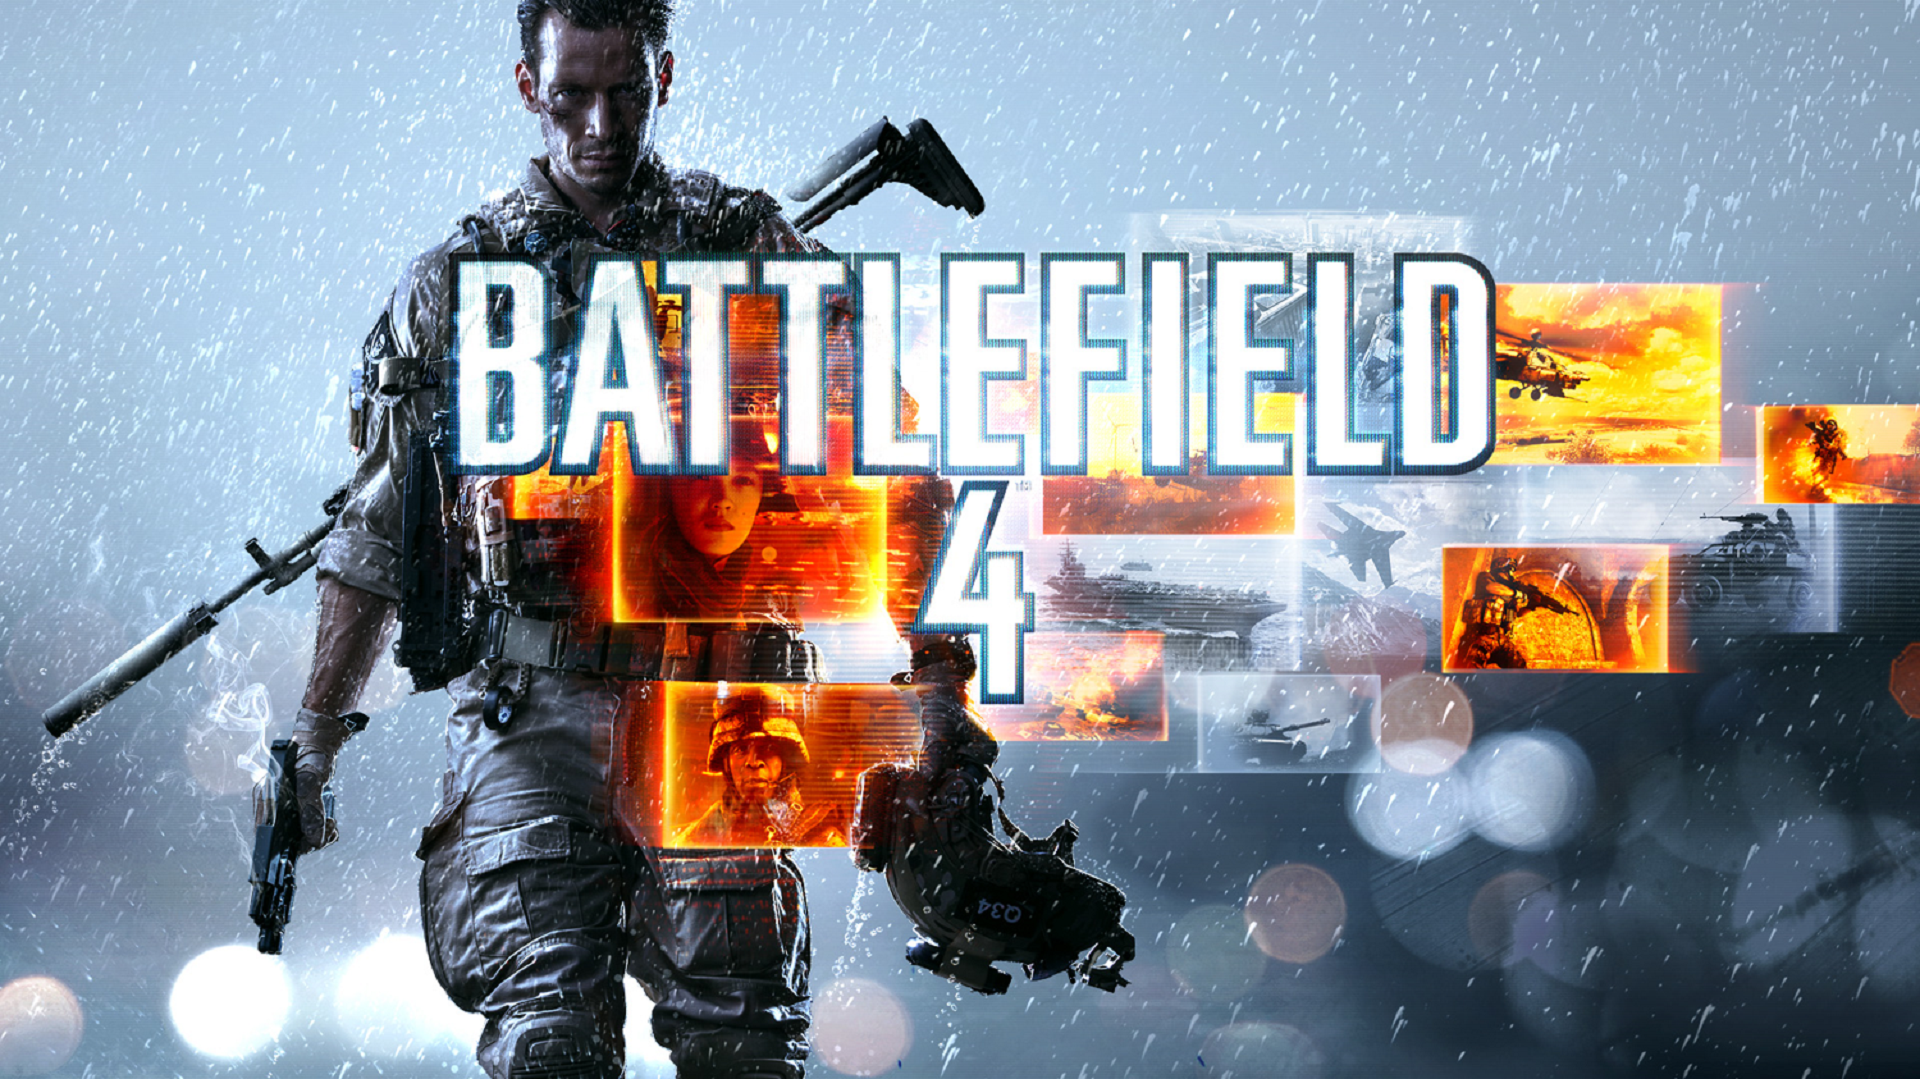  30 2015 By Stephen Comments Off on Battlefield 4 HD Wallpapers